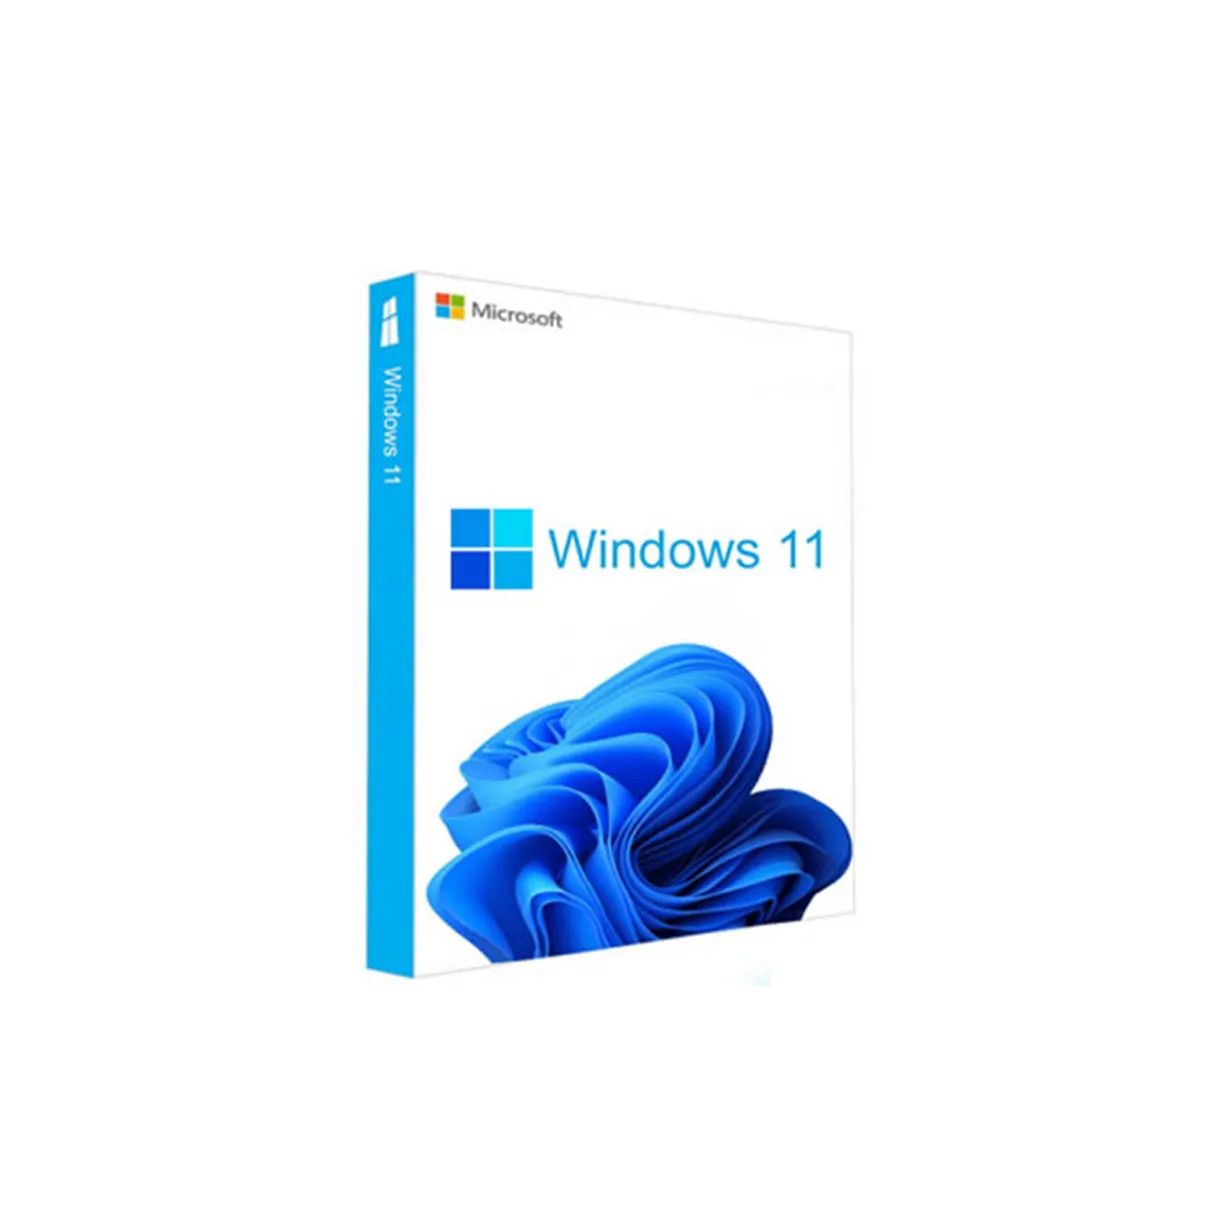 Email Delivery Windows 11 Pro Key win 11 pro Key